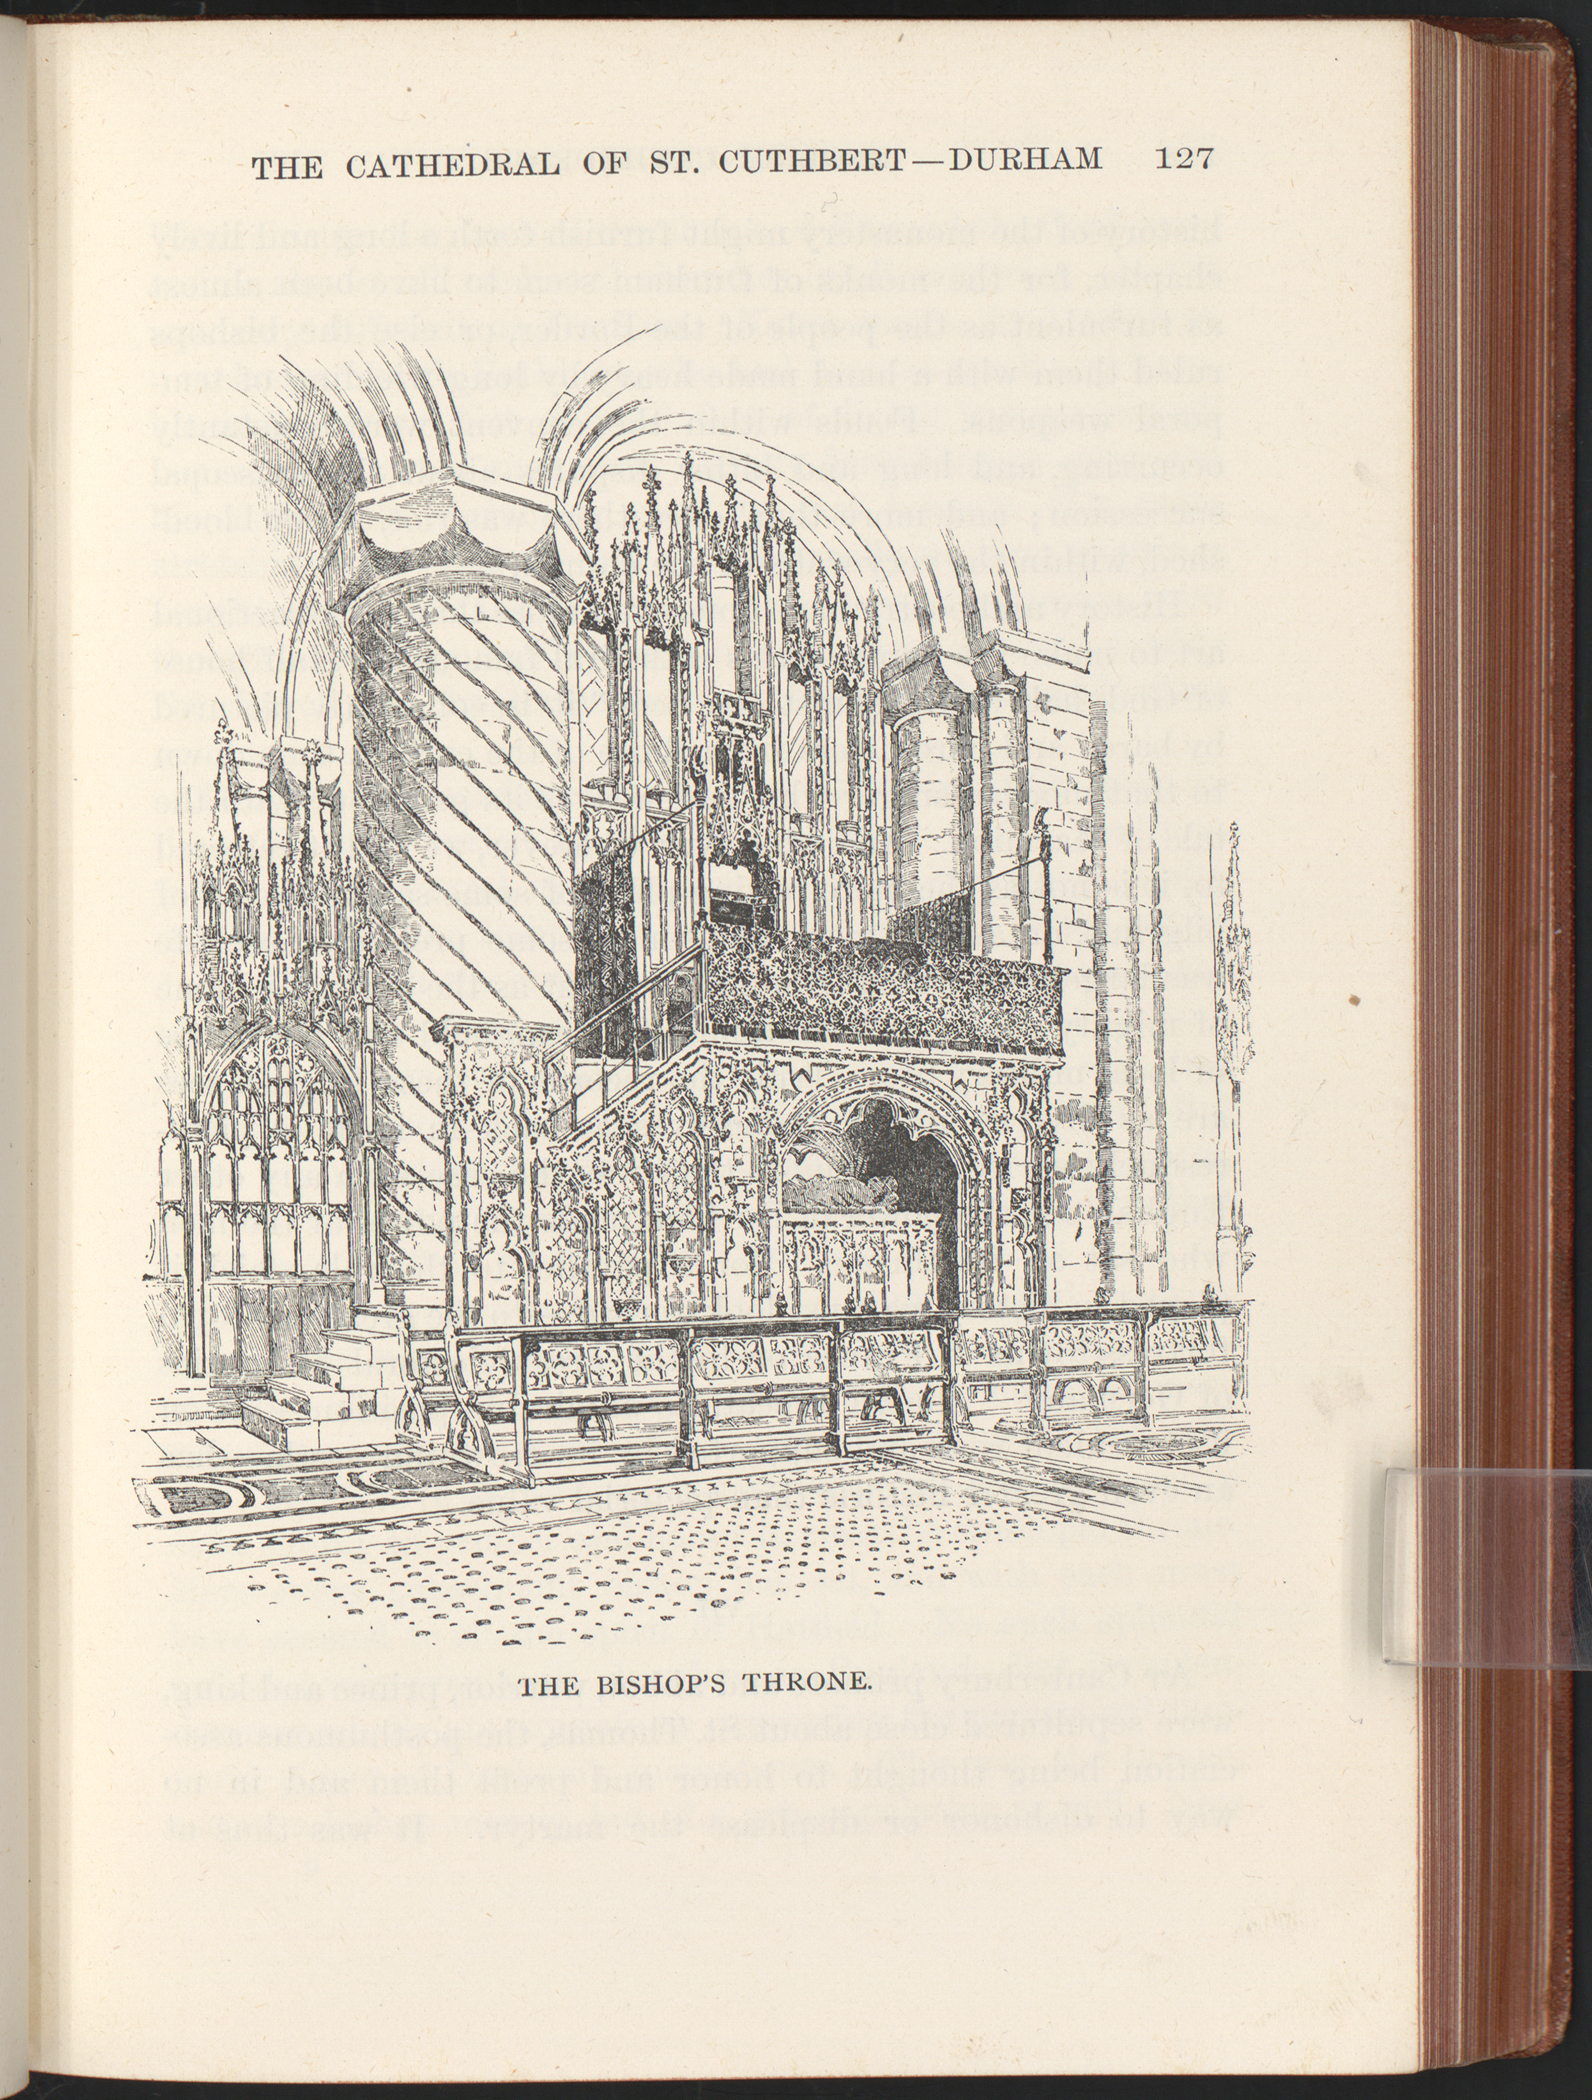 An illustration by Joseph Pennell in "Handbook of English Cathedrals"